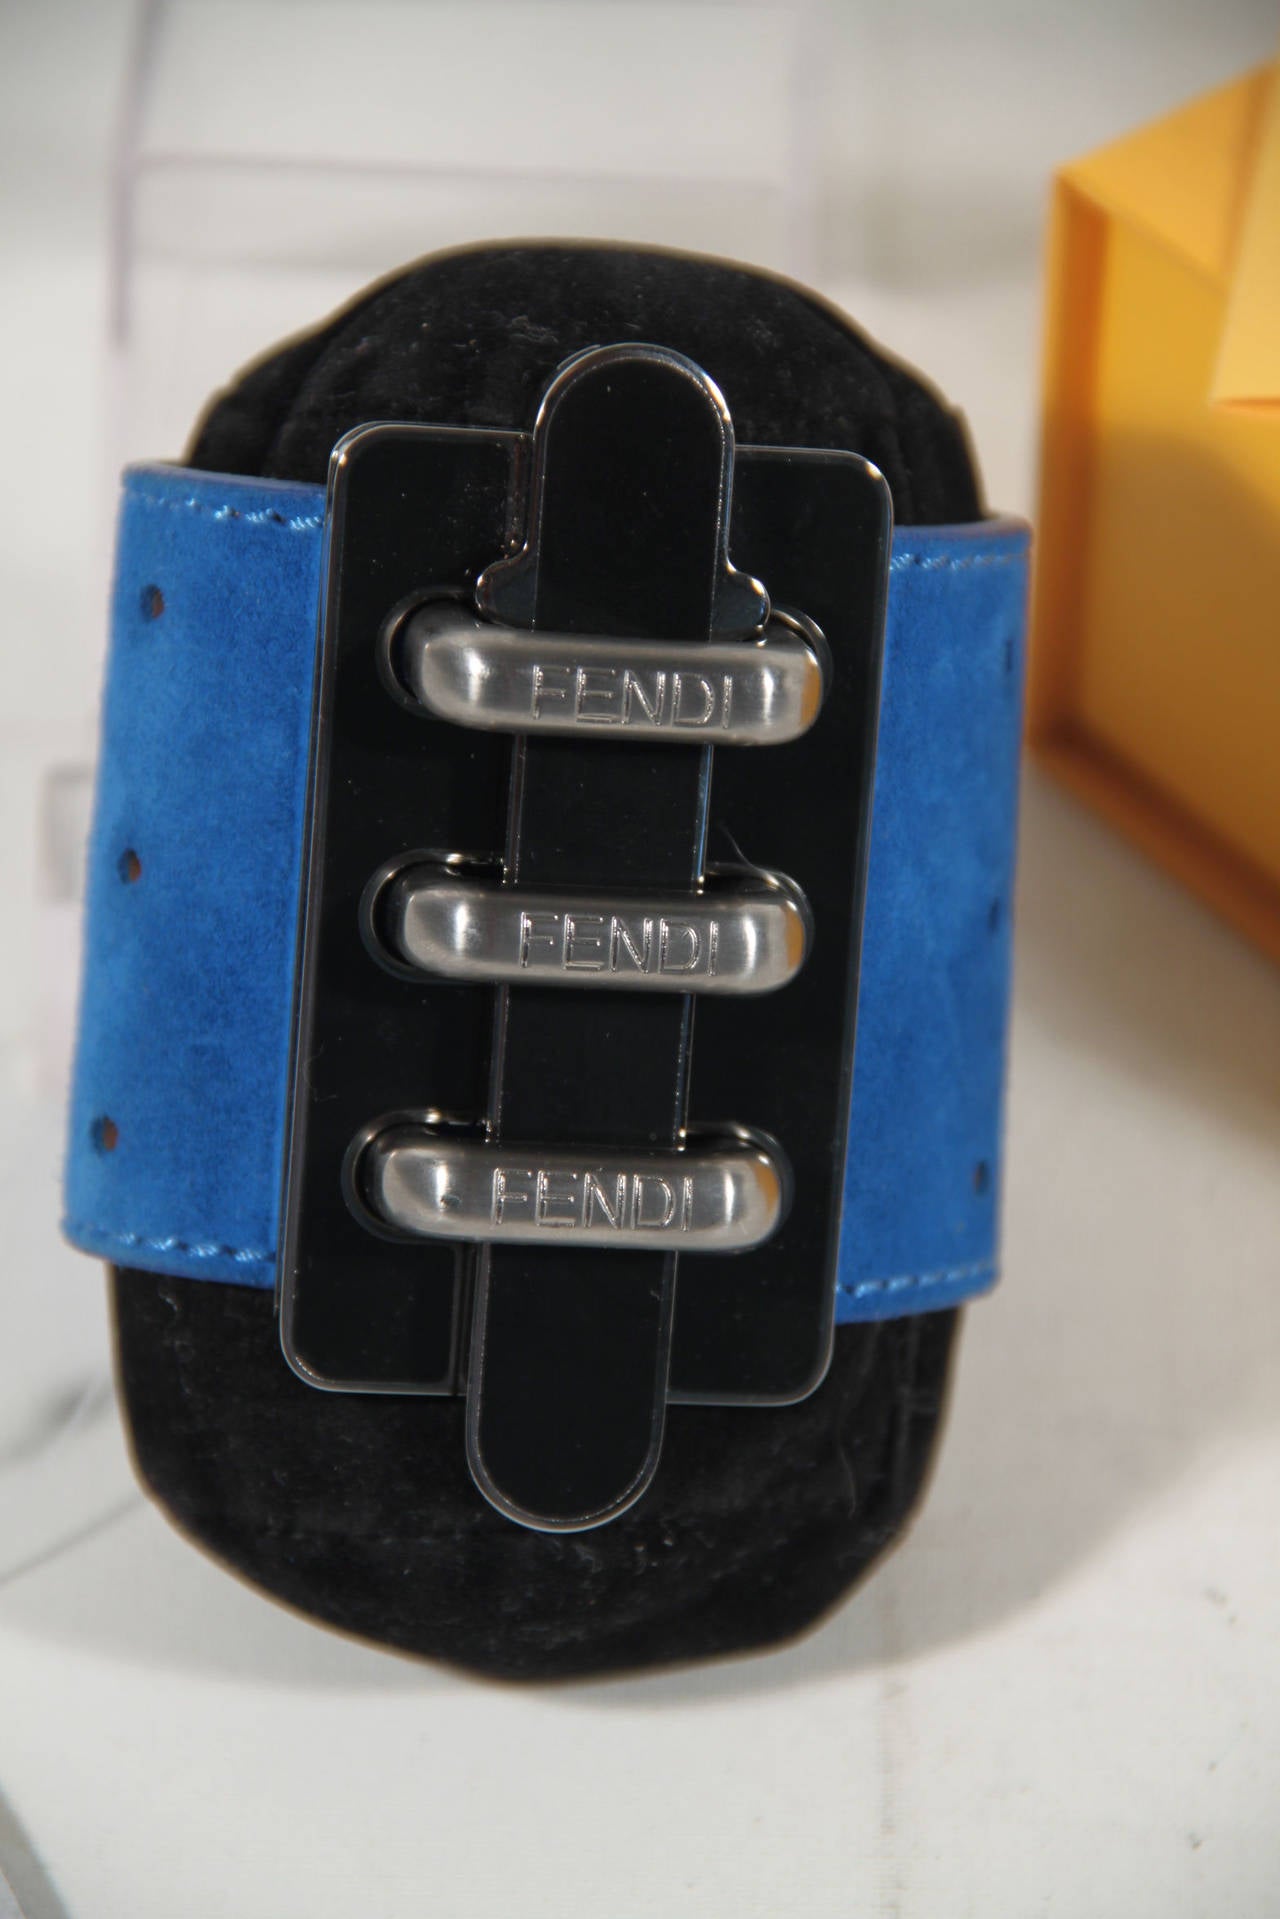 - Coabalt Blue Leather Goat

- Perforated

- Bushed Rutherium hardware with black enamel

- It will come with its original FENDI box, card and hang tag

- Size: M (The size shown for this item is the size indicated by the designer on the